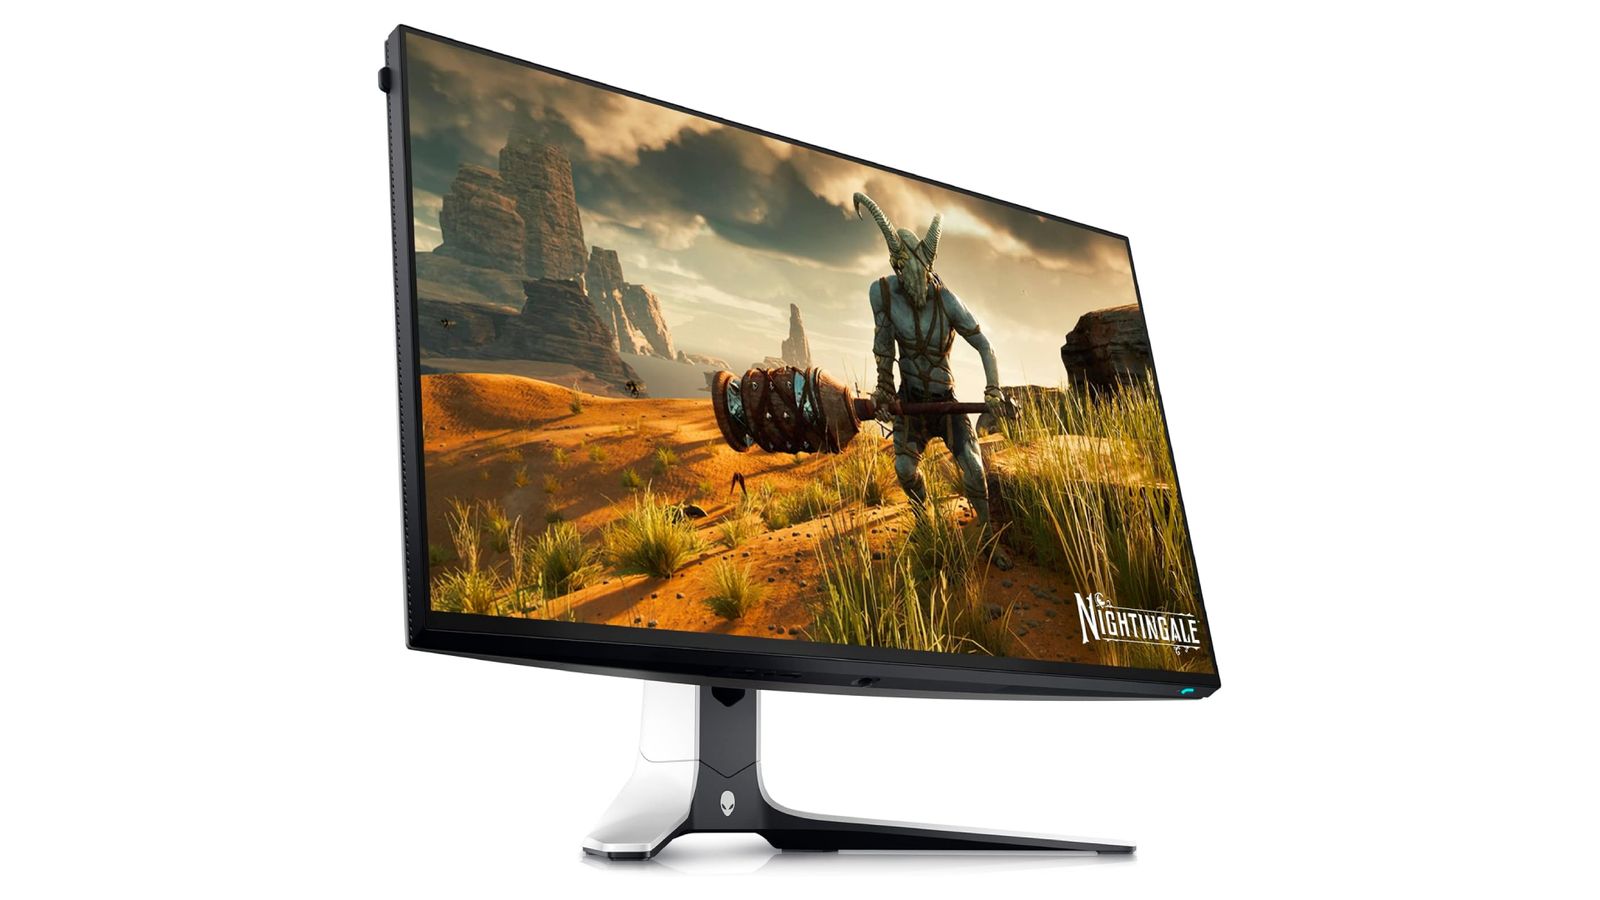 Alienware AW2723DF product image of a white and black monitor featuring Nightgale gameplay on the display.